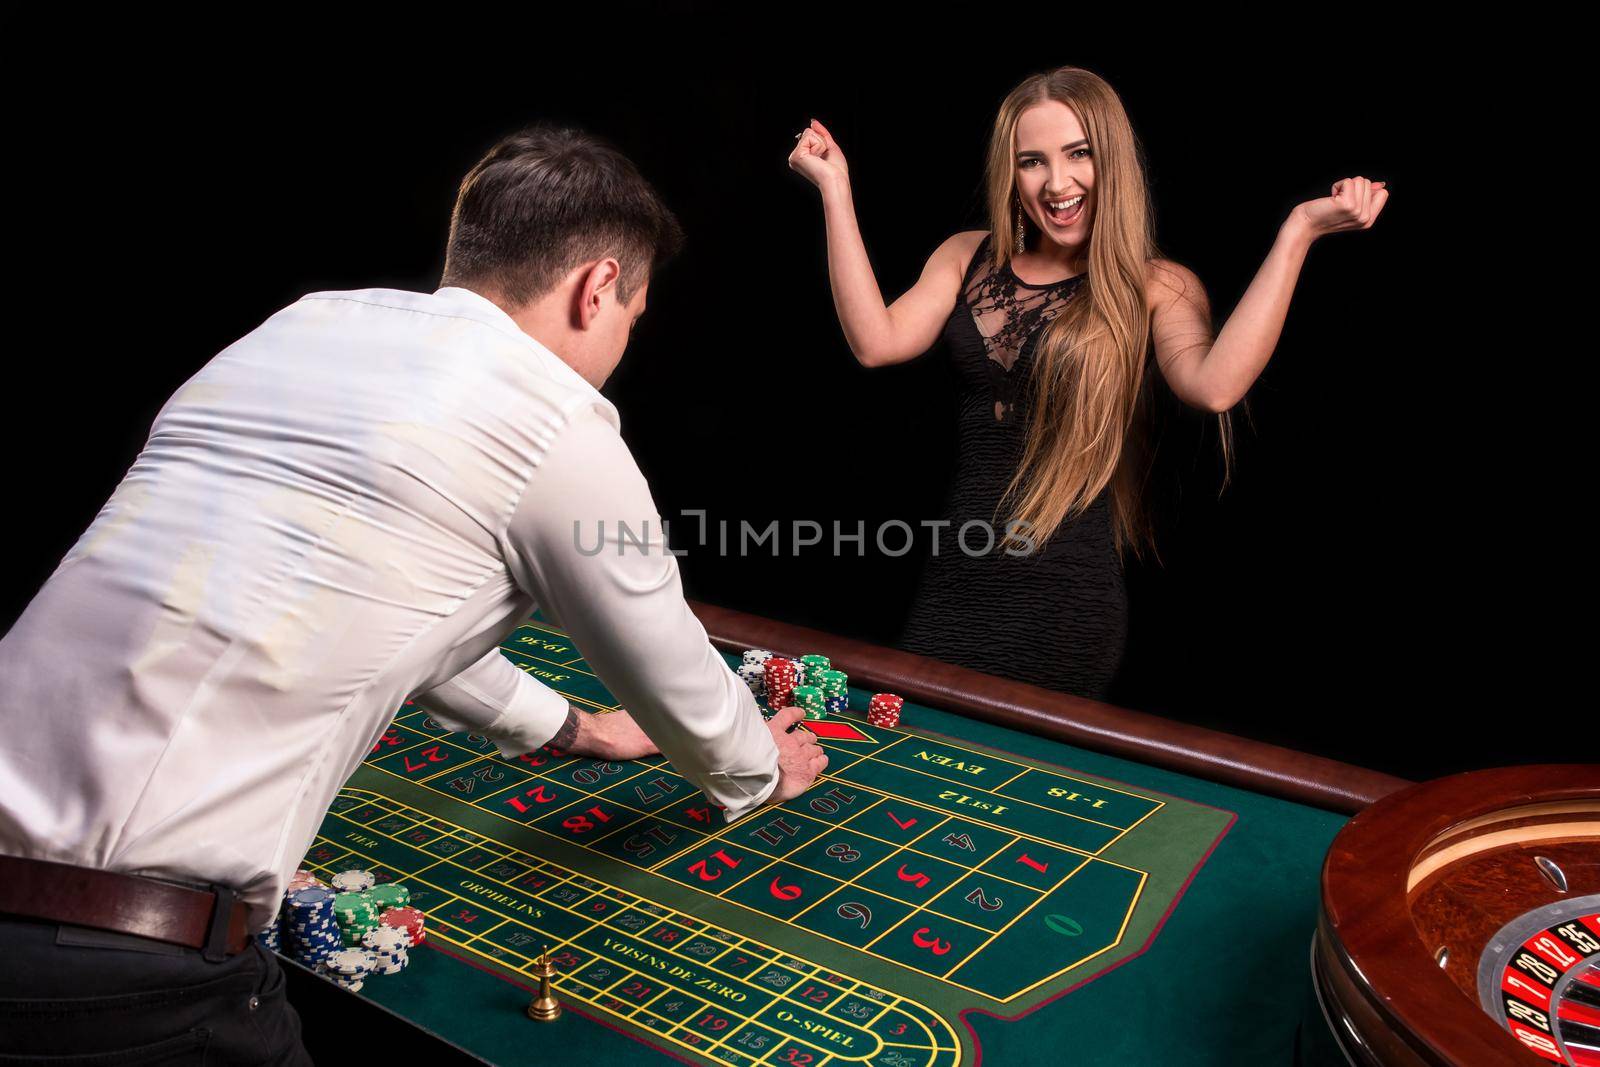 A close-up on the back of the croupier in a white shirt, image of green casino table with roulette and chips, a rich woman betting of gambling in the background by nazarovsergey